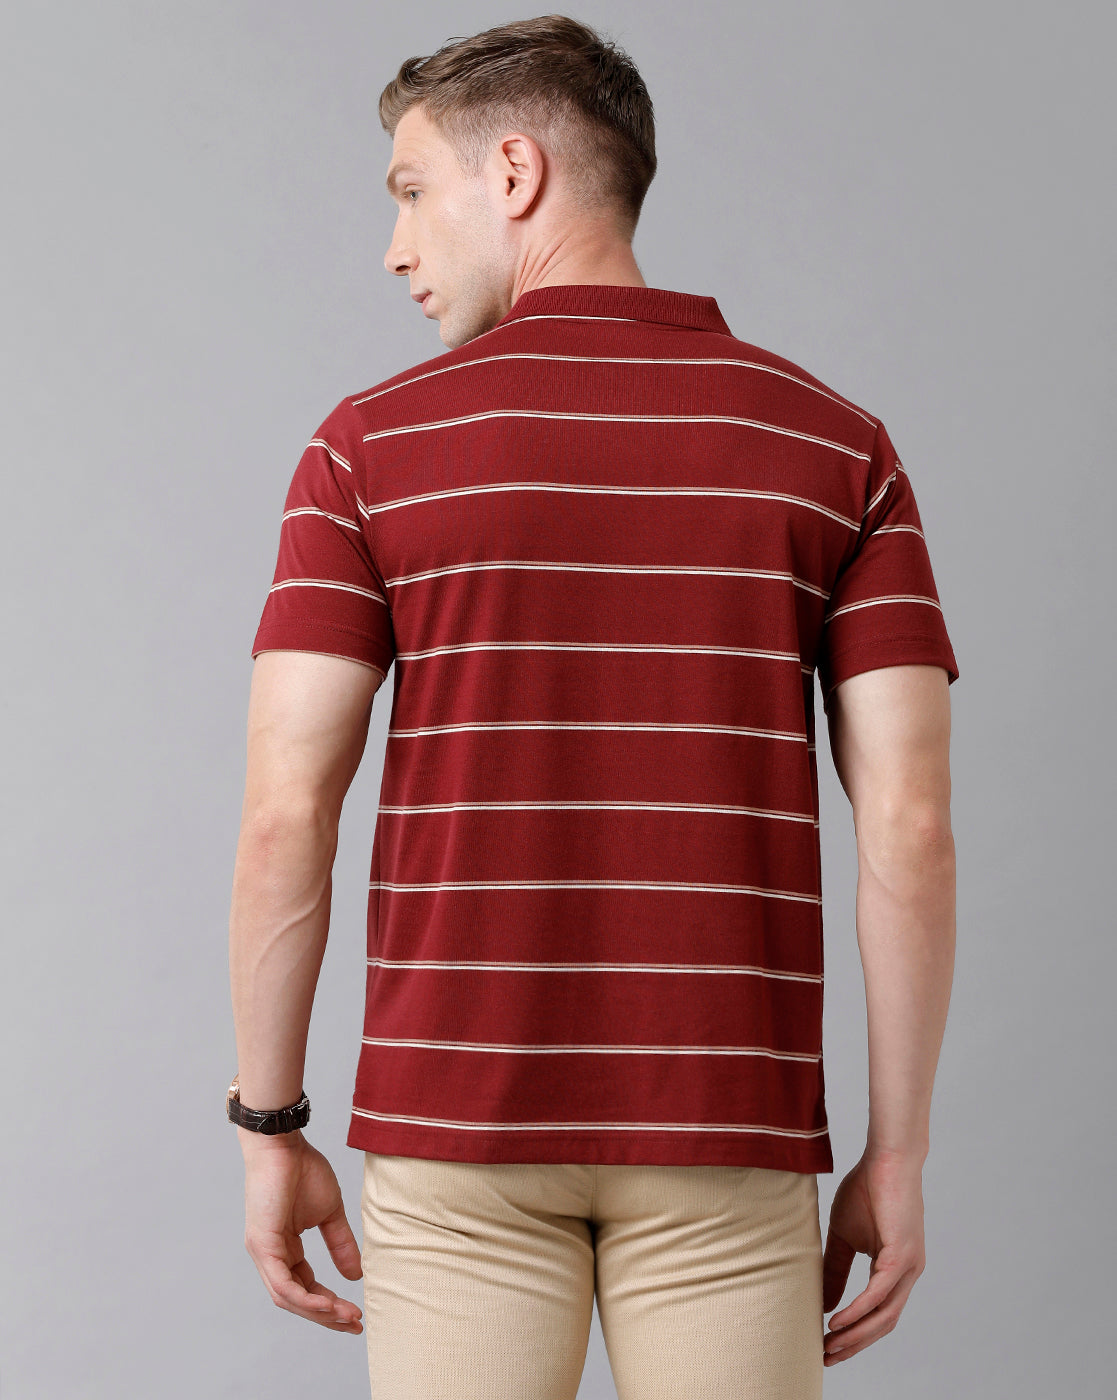 Classic Polo Men's Cotton Blend Striped Half Sleeve Regular Fit Polo Neck Red Color T-Shirt | Avon - 494 A